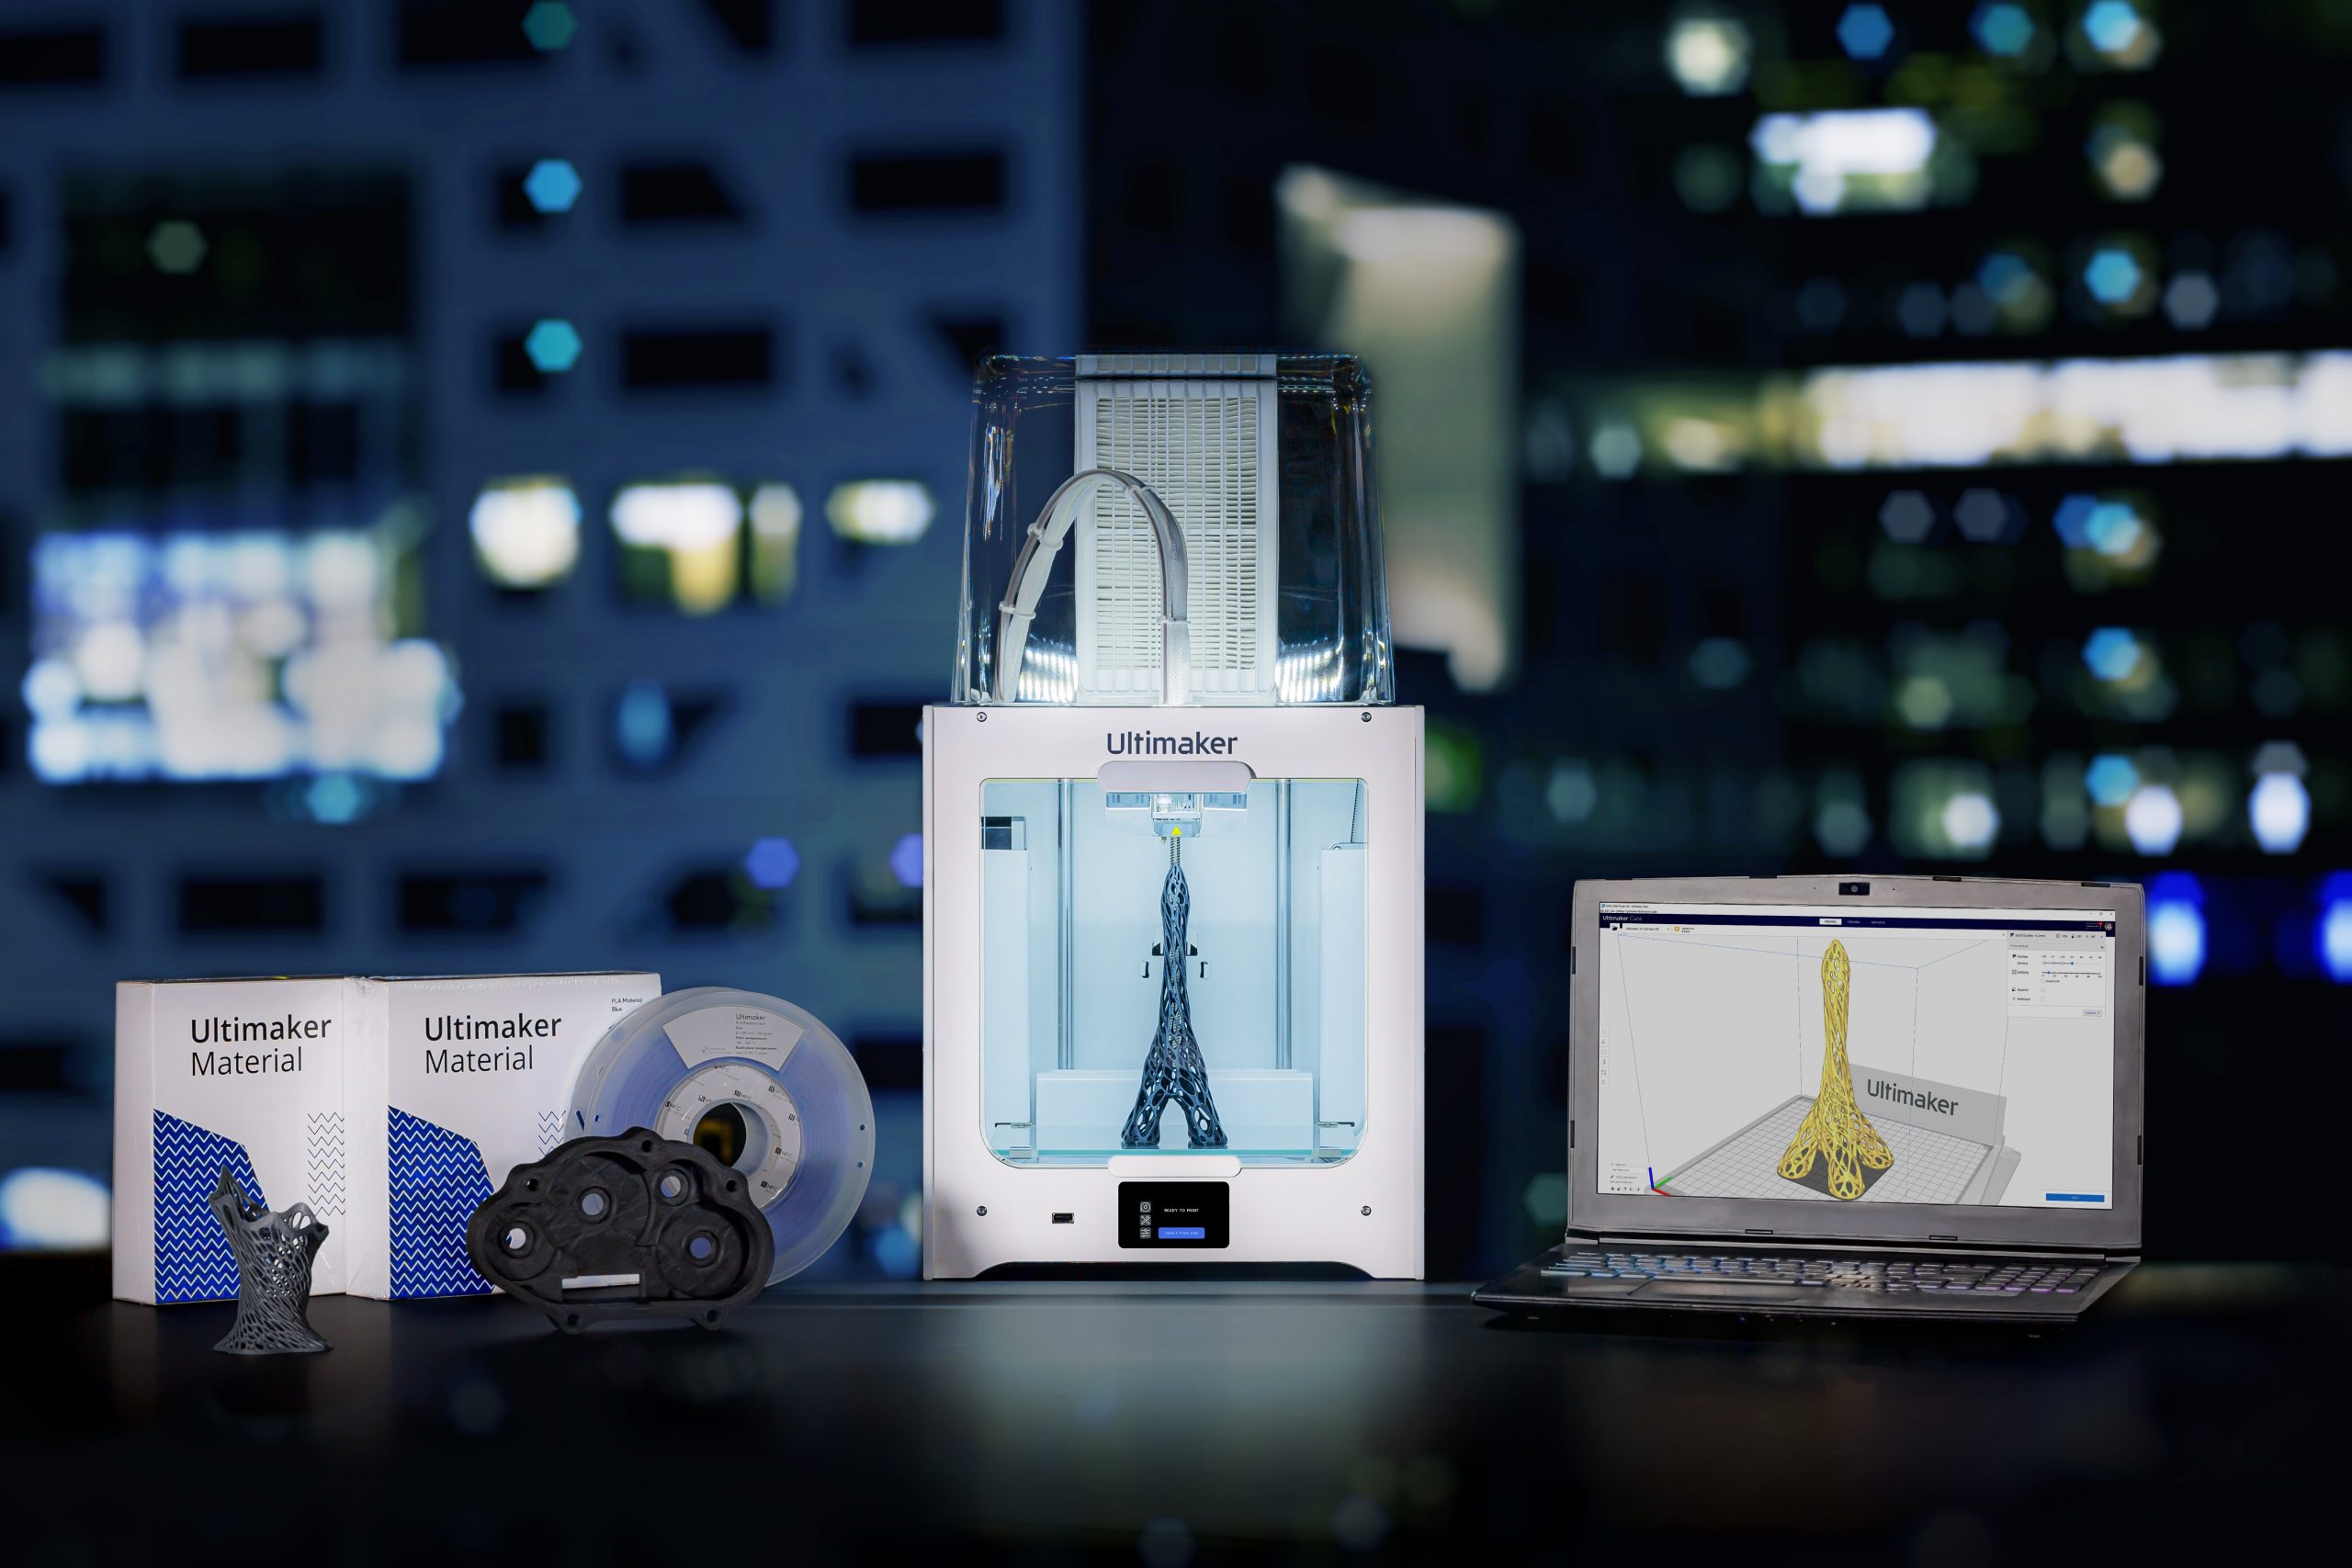 An Ultimaker 3D printer along with related materials and software.